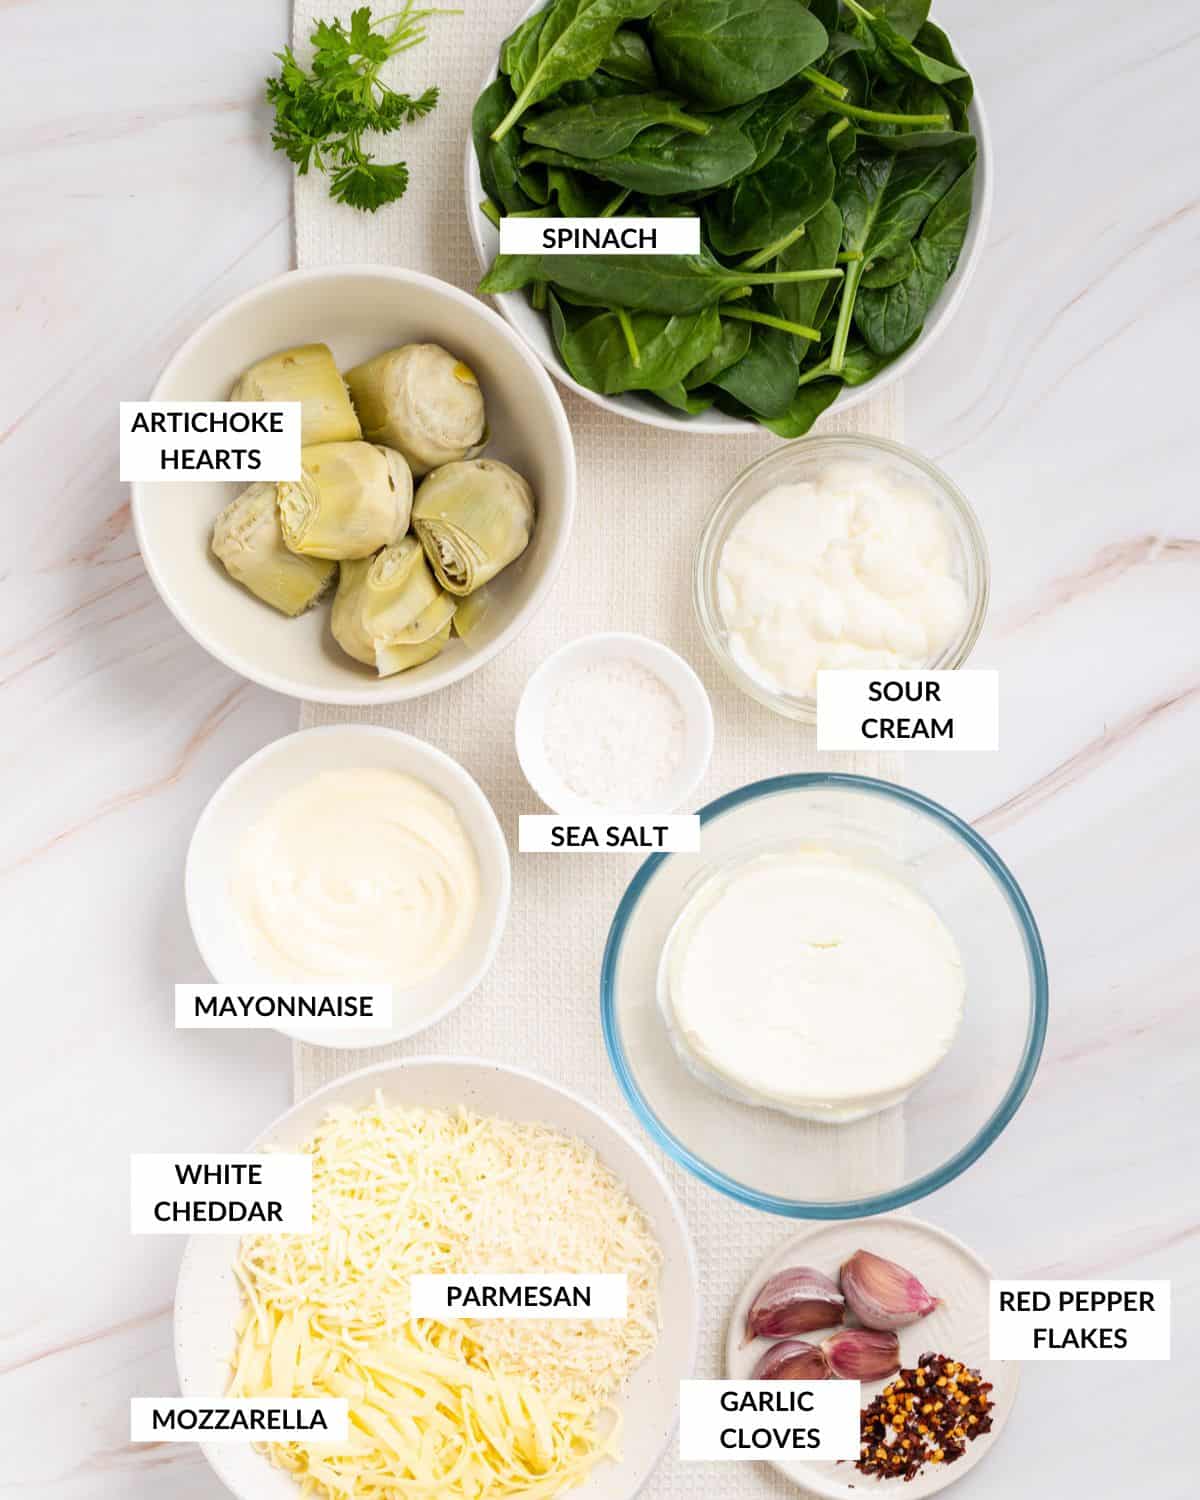 Labeled ingredients for Instant Pot Spinach and Artichoke Dip - check recipe card for details.